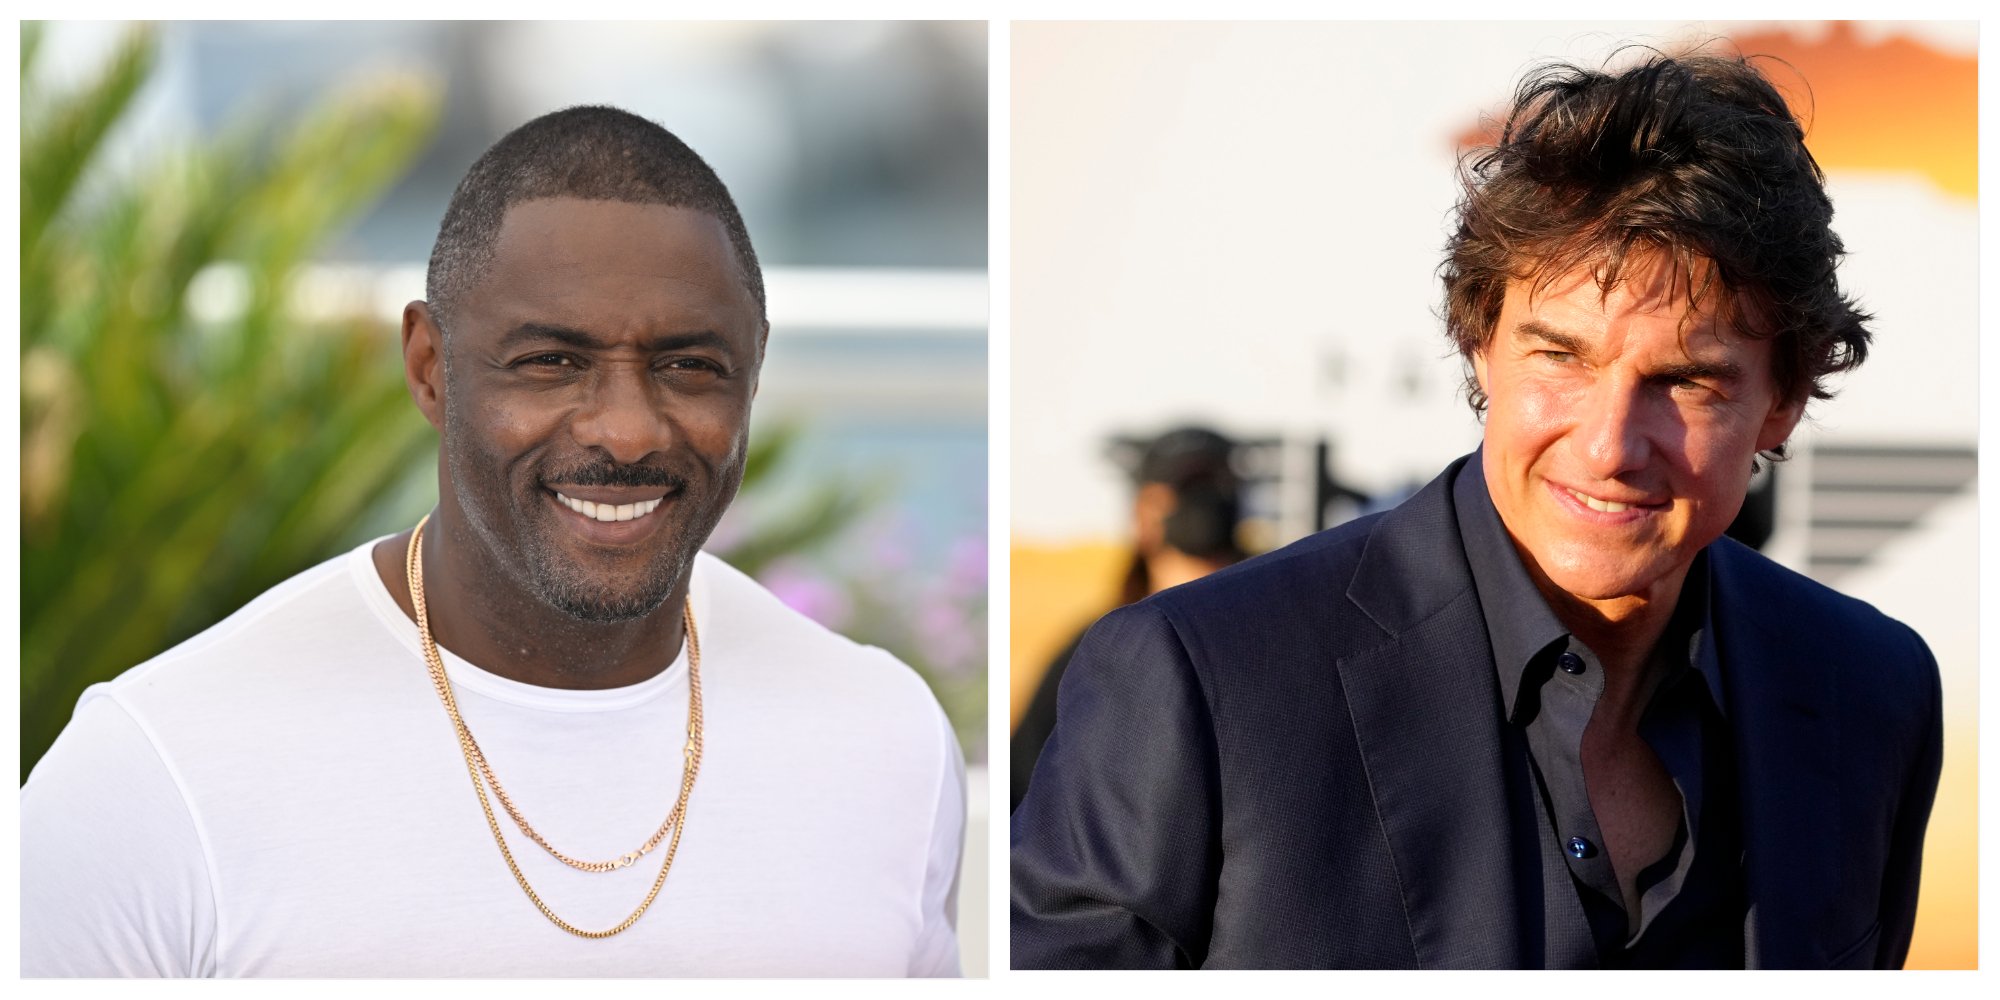 Idris Elba at the Cannes Film Festival. Tom Cruise attended the premiere of 'Top Gun'